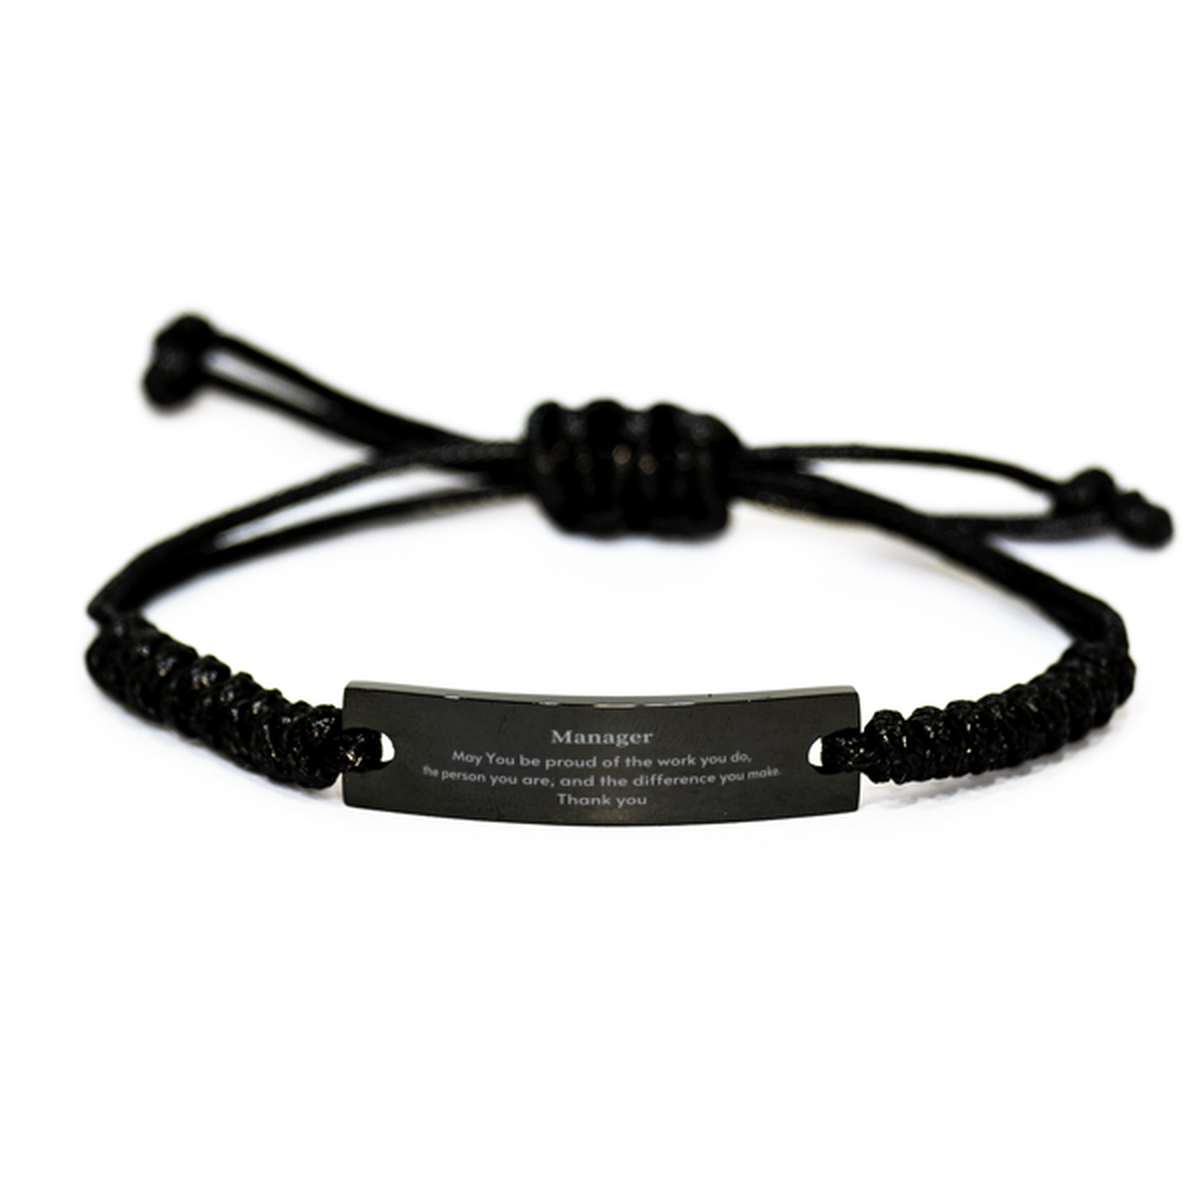 Heartwarming Black Rope Bracelet Retirement Coworkers Gifts for Manager, Manager May You be proud of the work you do, the person you are Gifts for Boss Men Women Friends